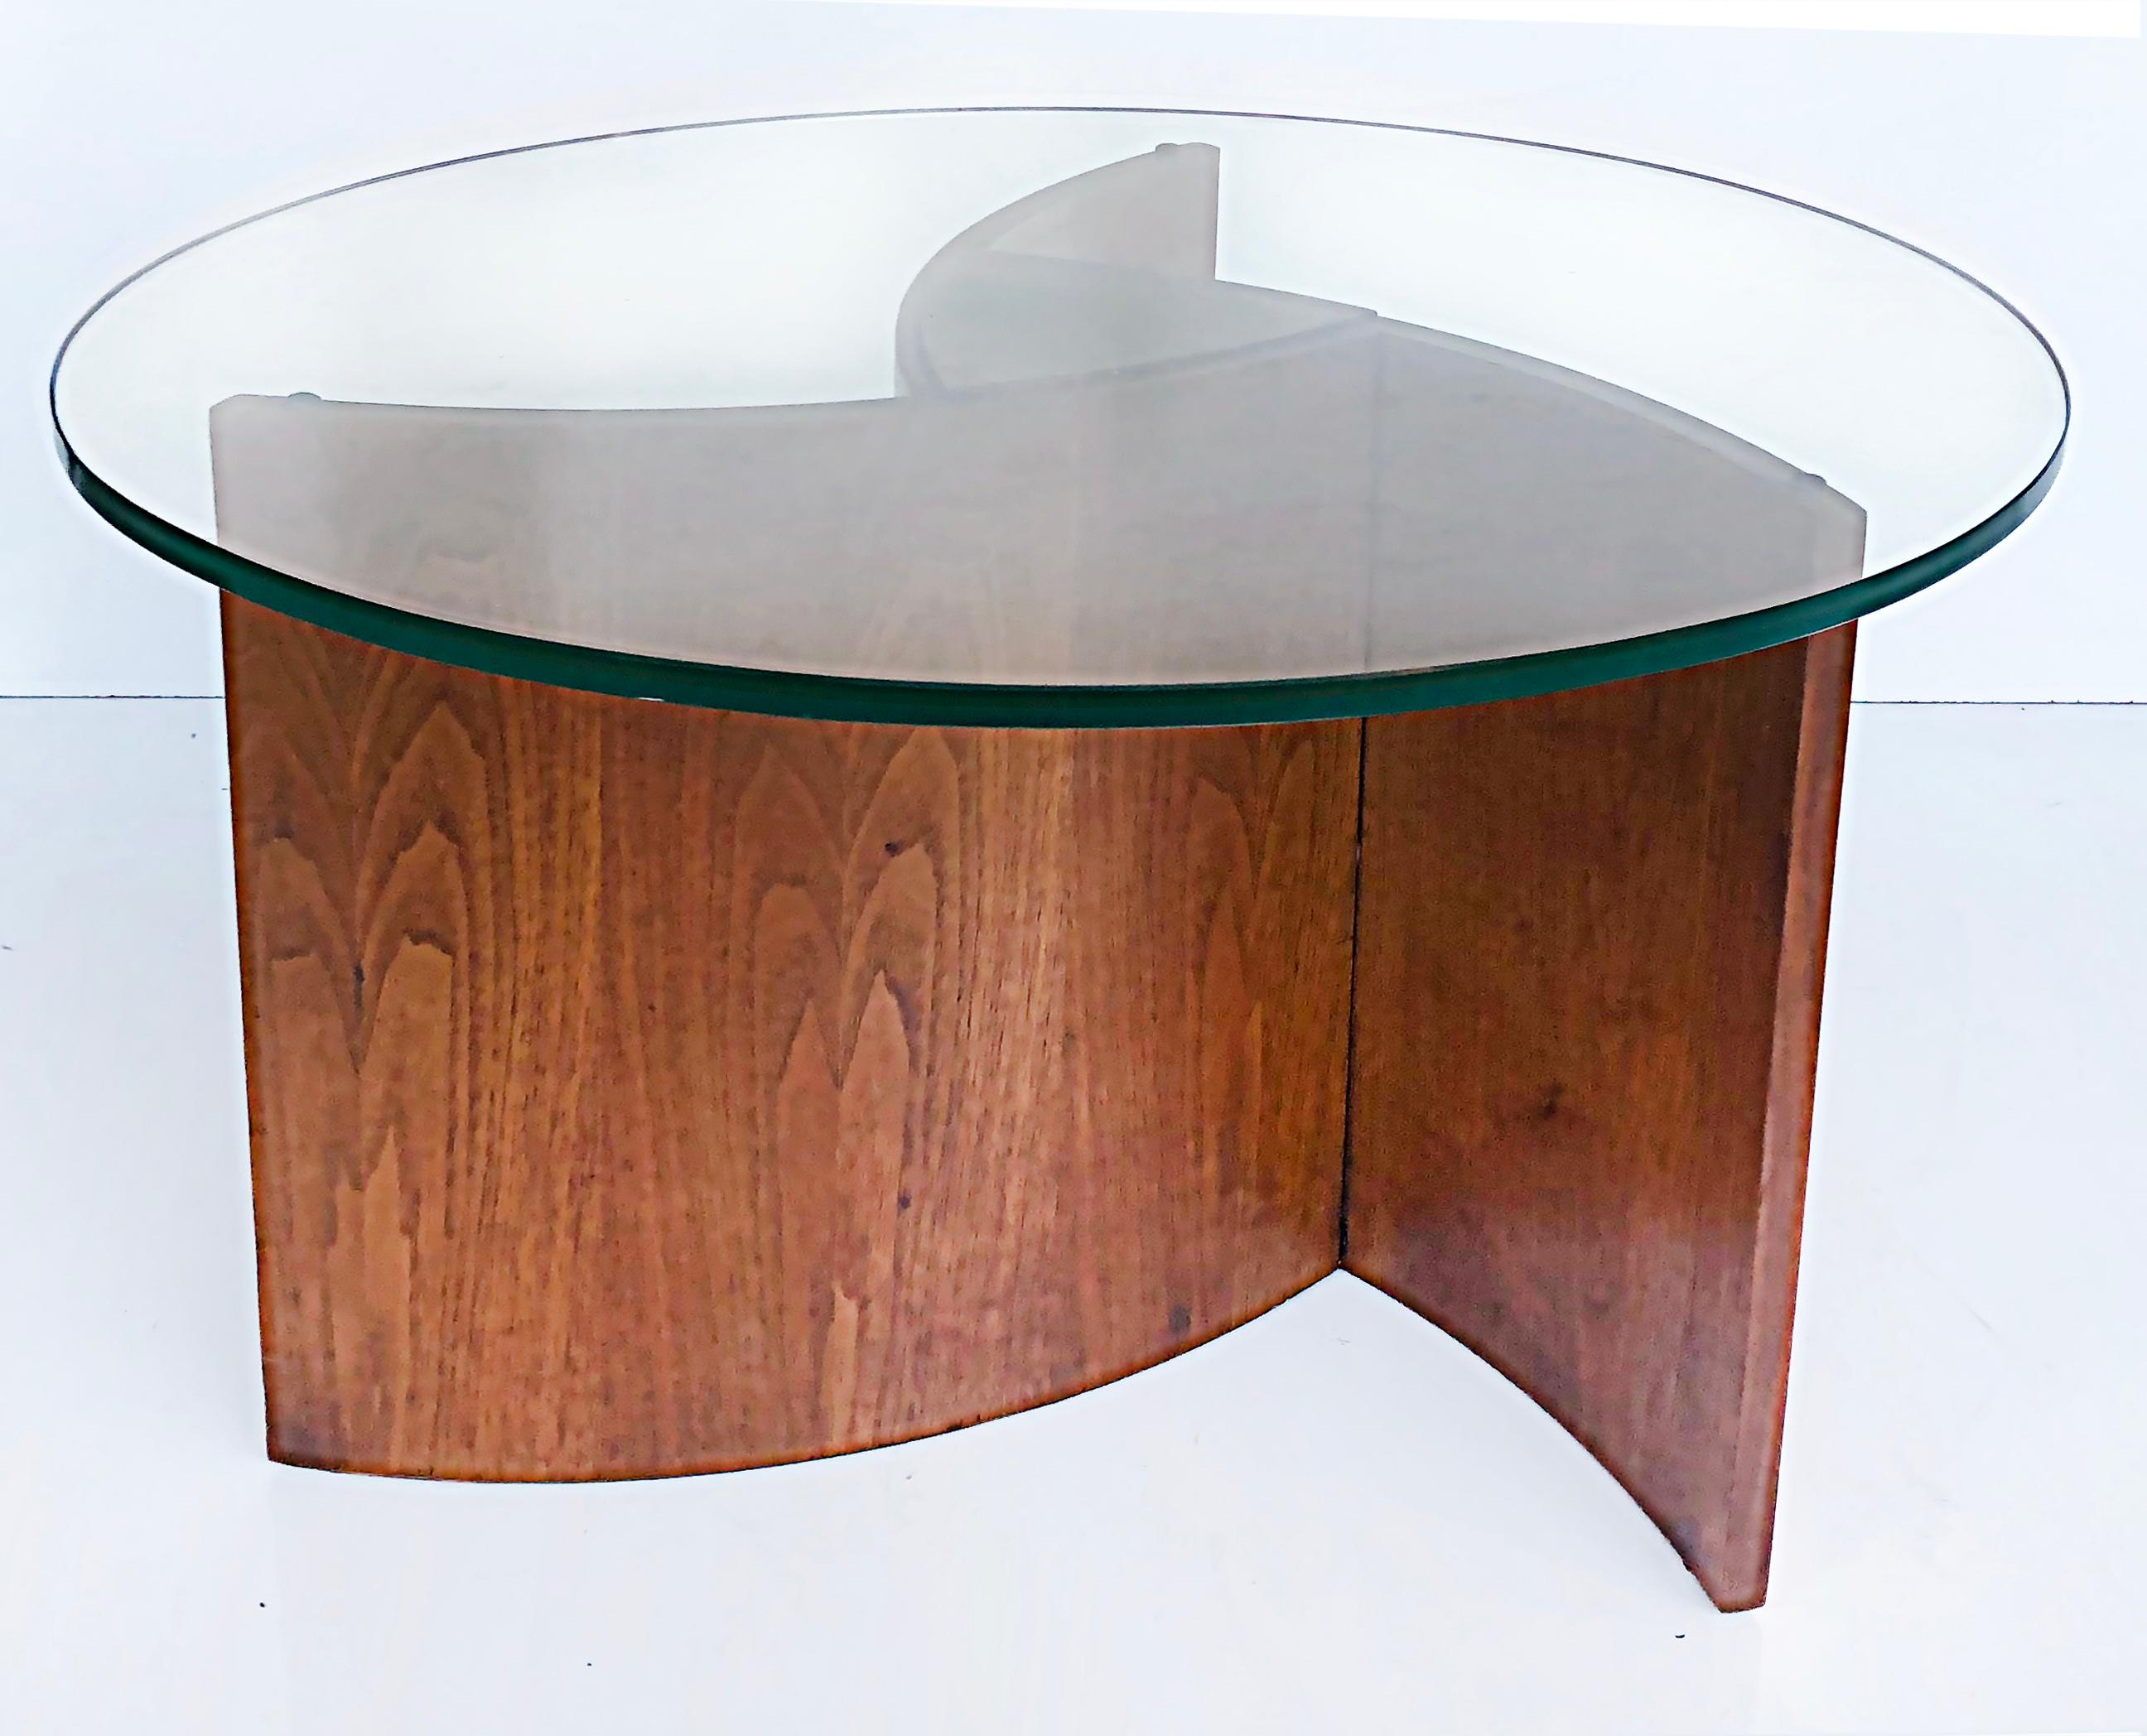 American Vintage Vladimir Kagan Propellor Form Walnut Coffee Table with Glass Top, 1960s